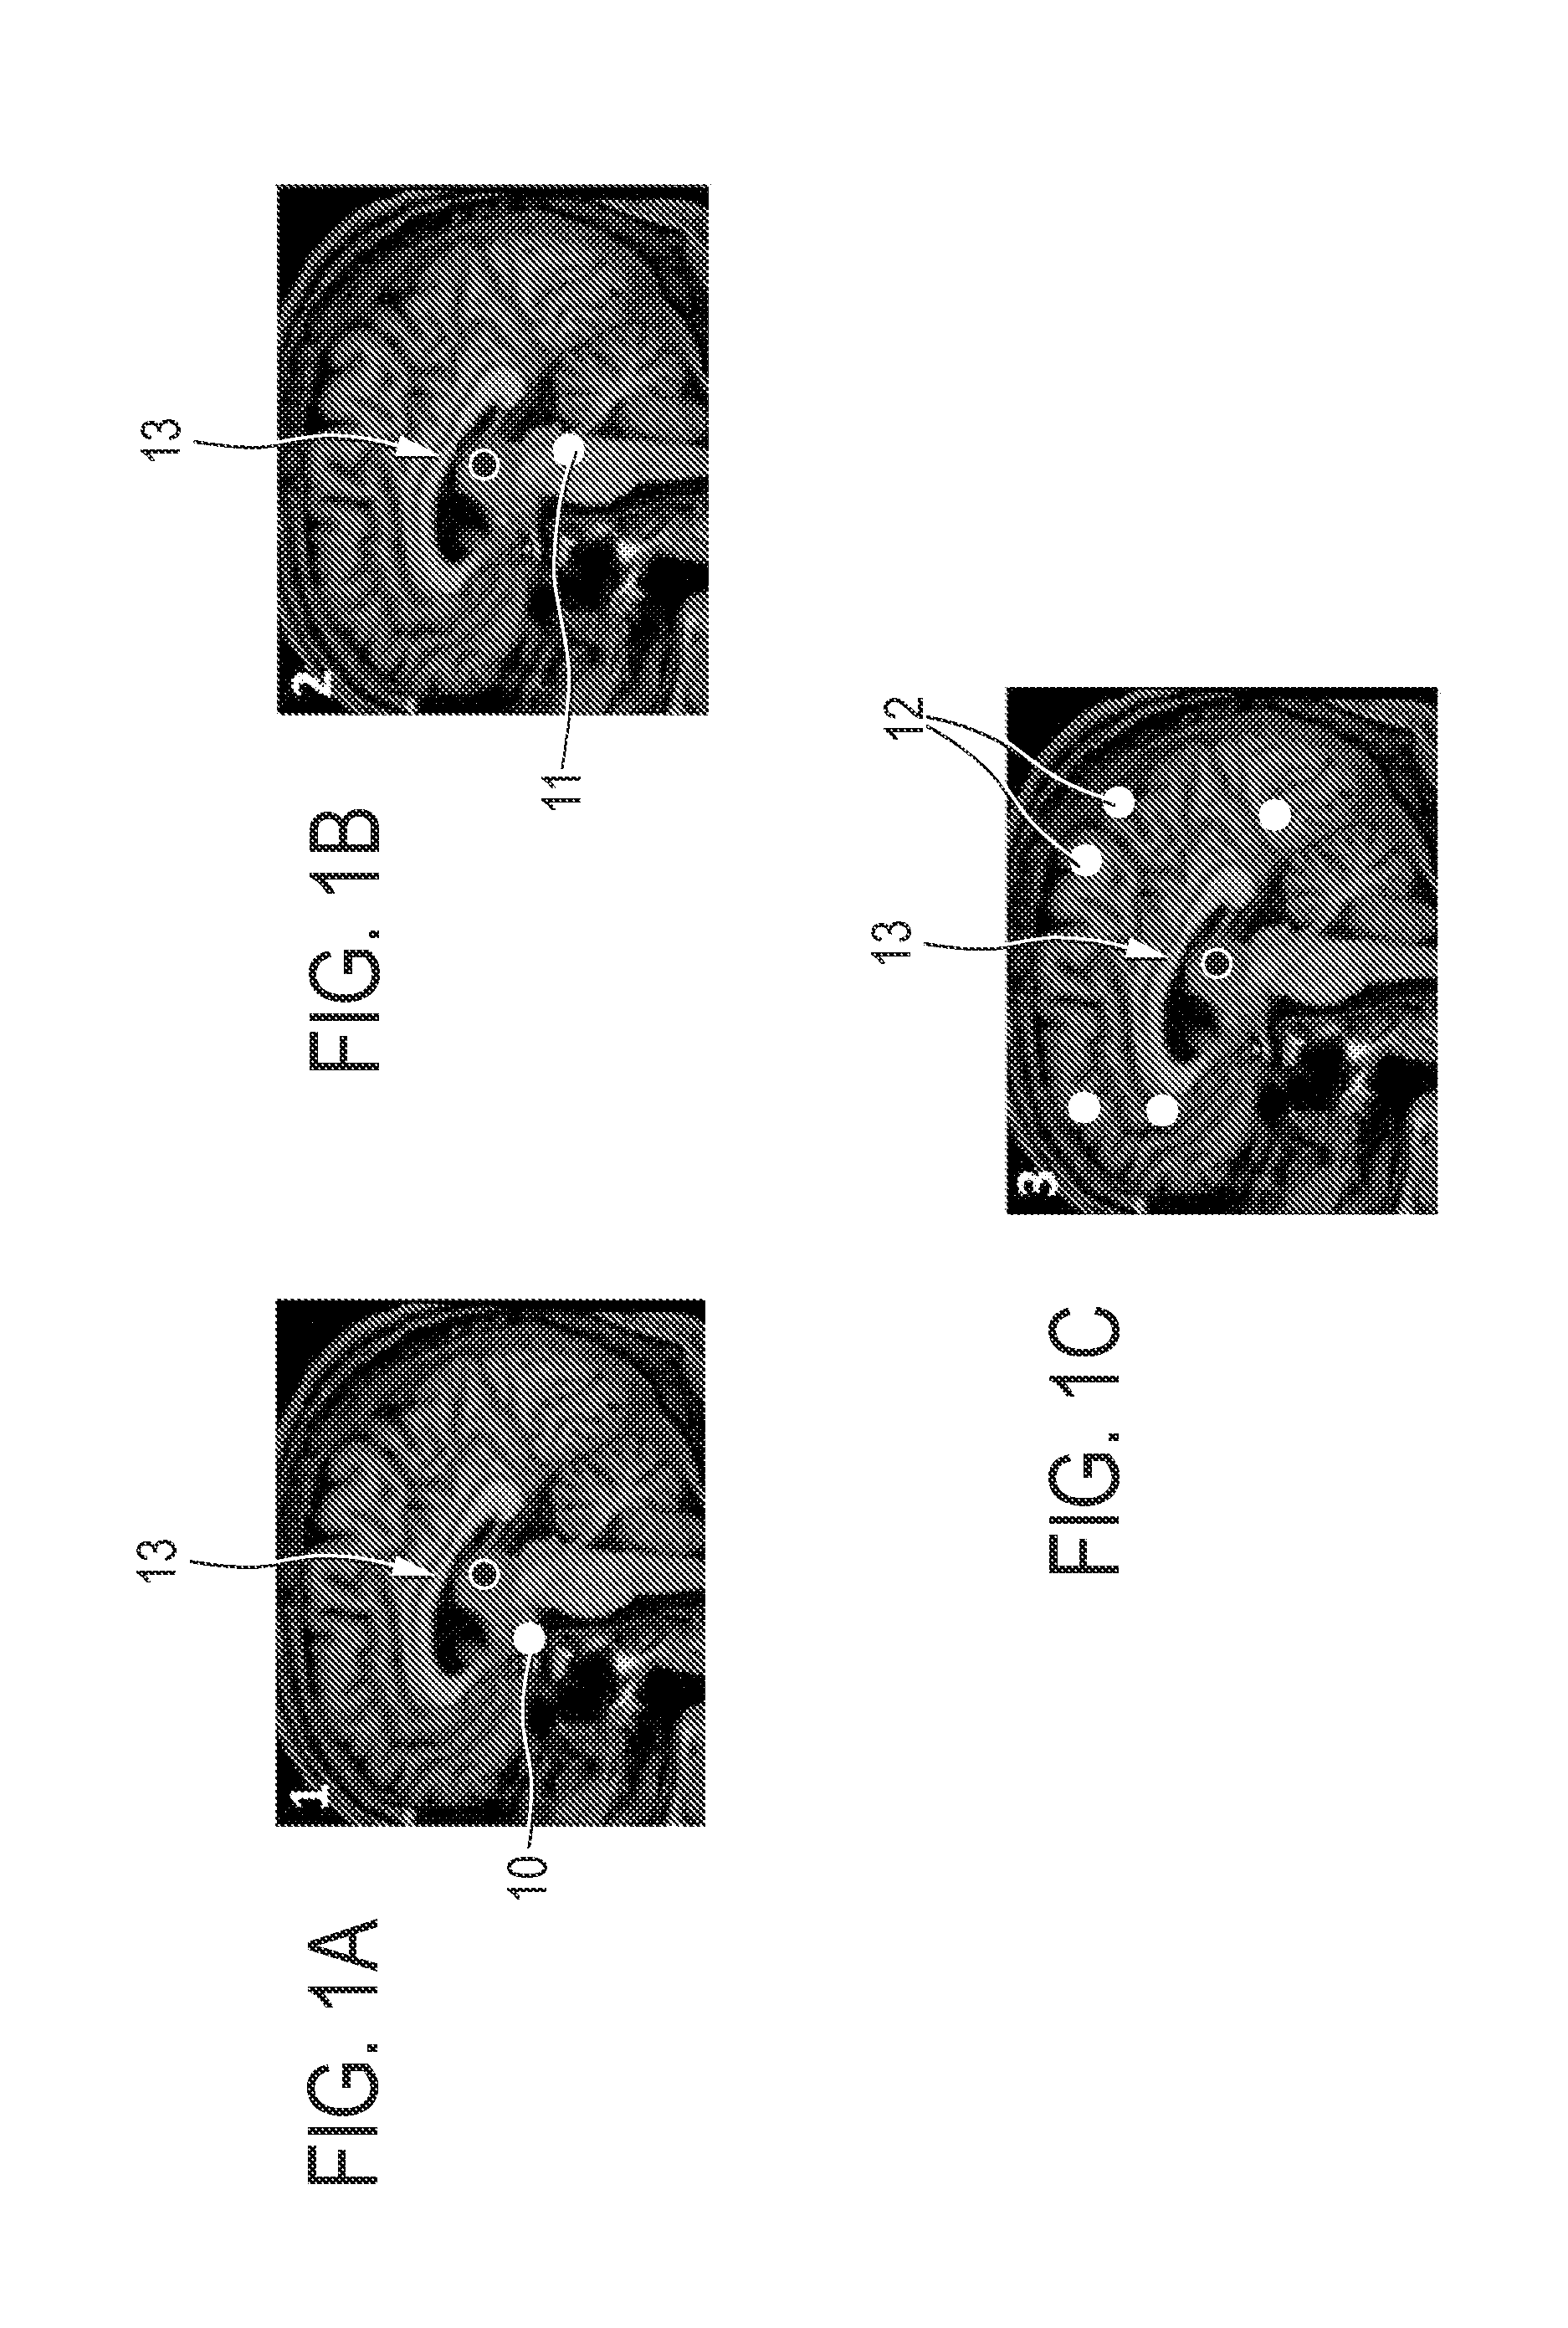 Device and method for cognitive enhancement of a user